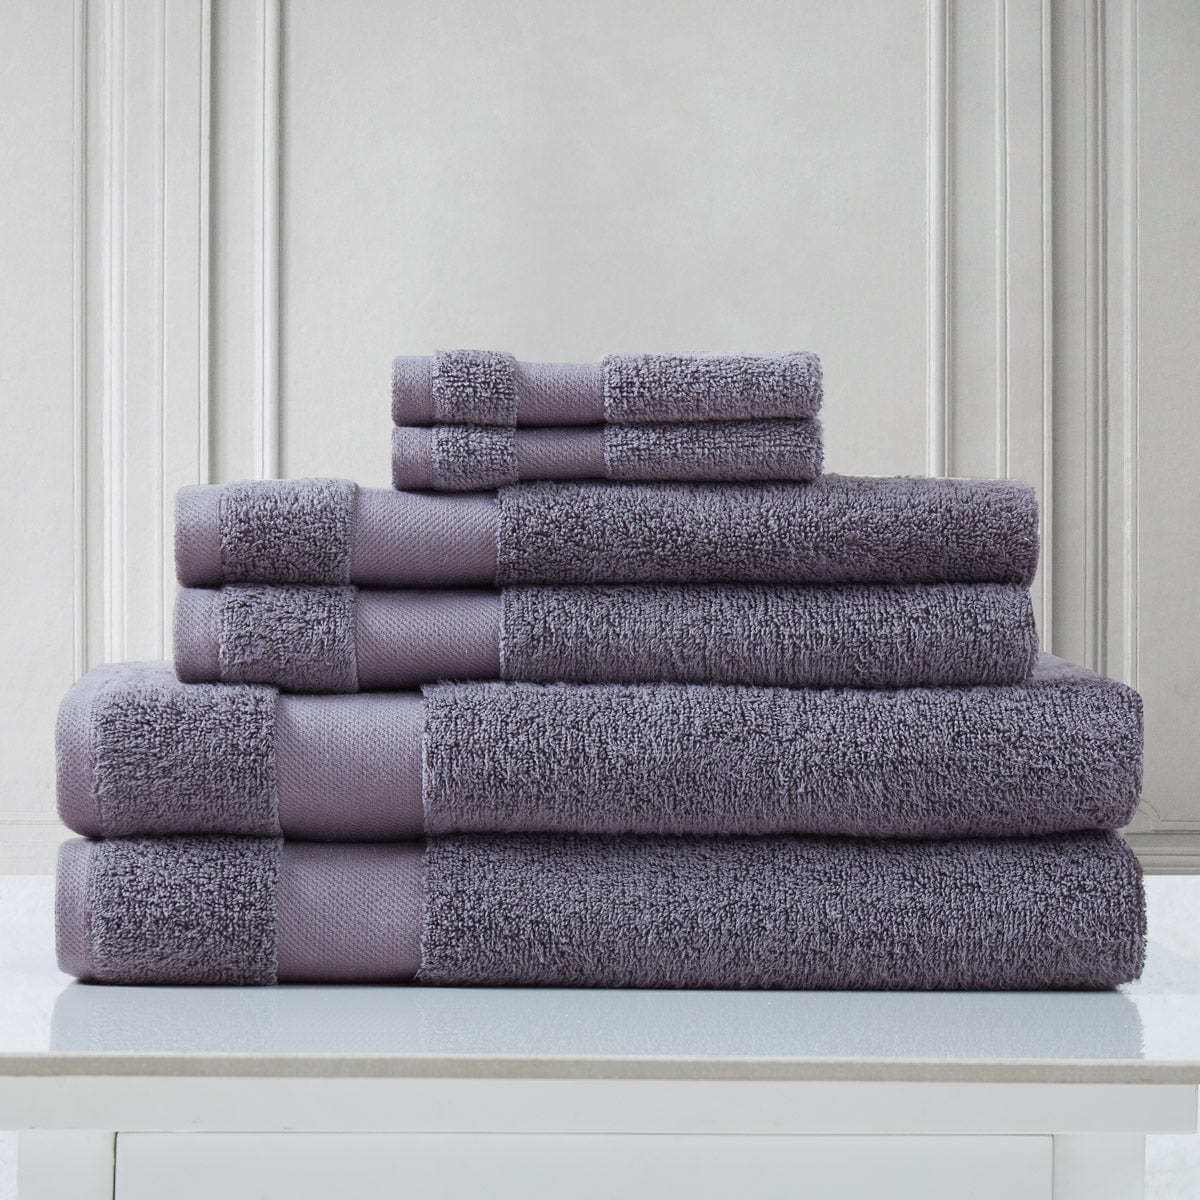 6 Piece of Super-Plush Bath Towel, Hand Towels and Wash Cloth in Lavender#color_medium-weight-classic-towel-muted-lavender